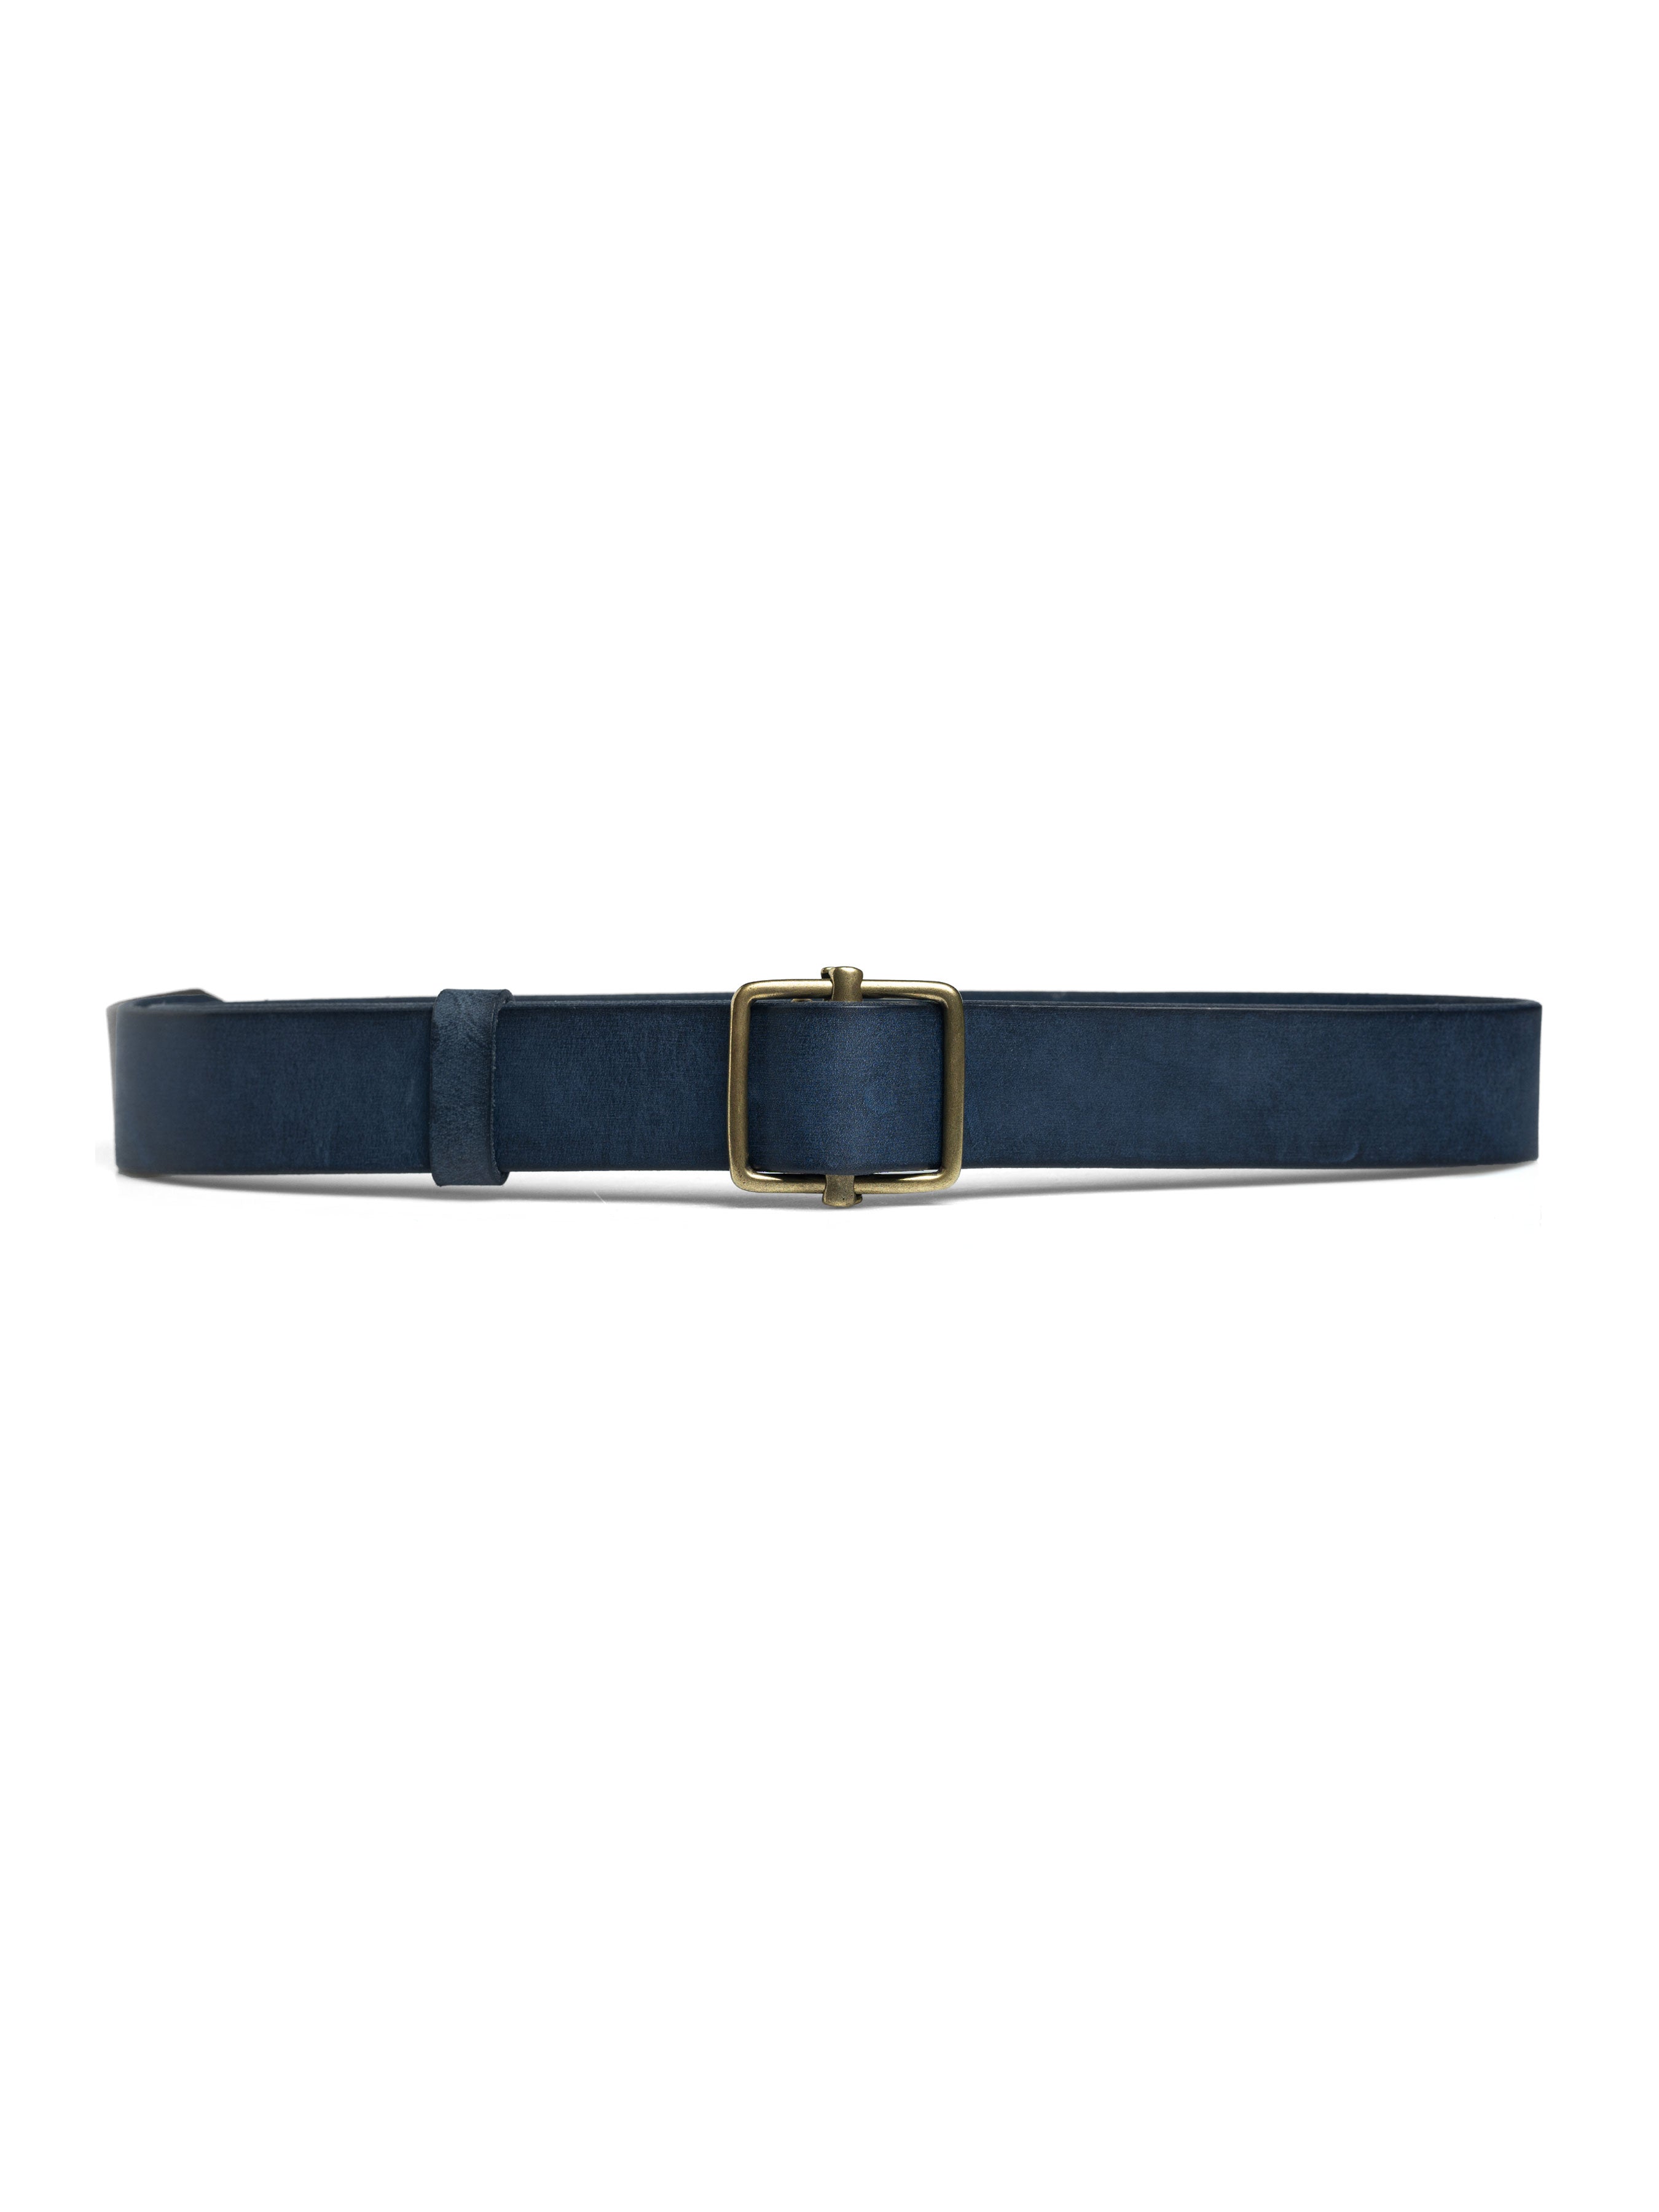 Italian Rustic Leather Belt with Adjuster Gold-toned Buckle - Zeve Shoes